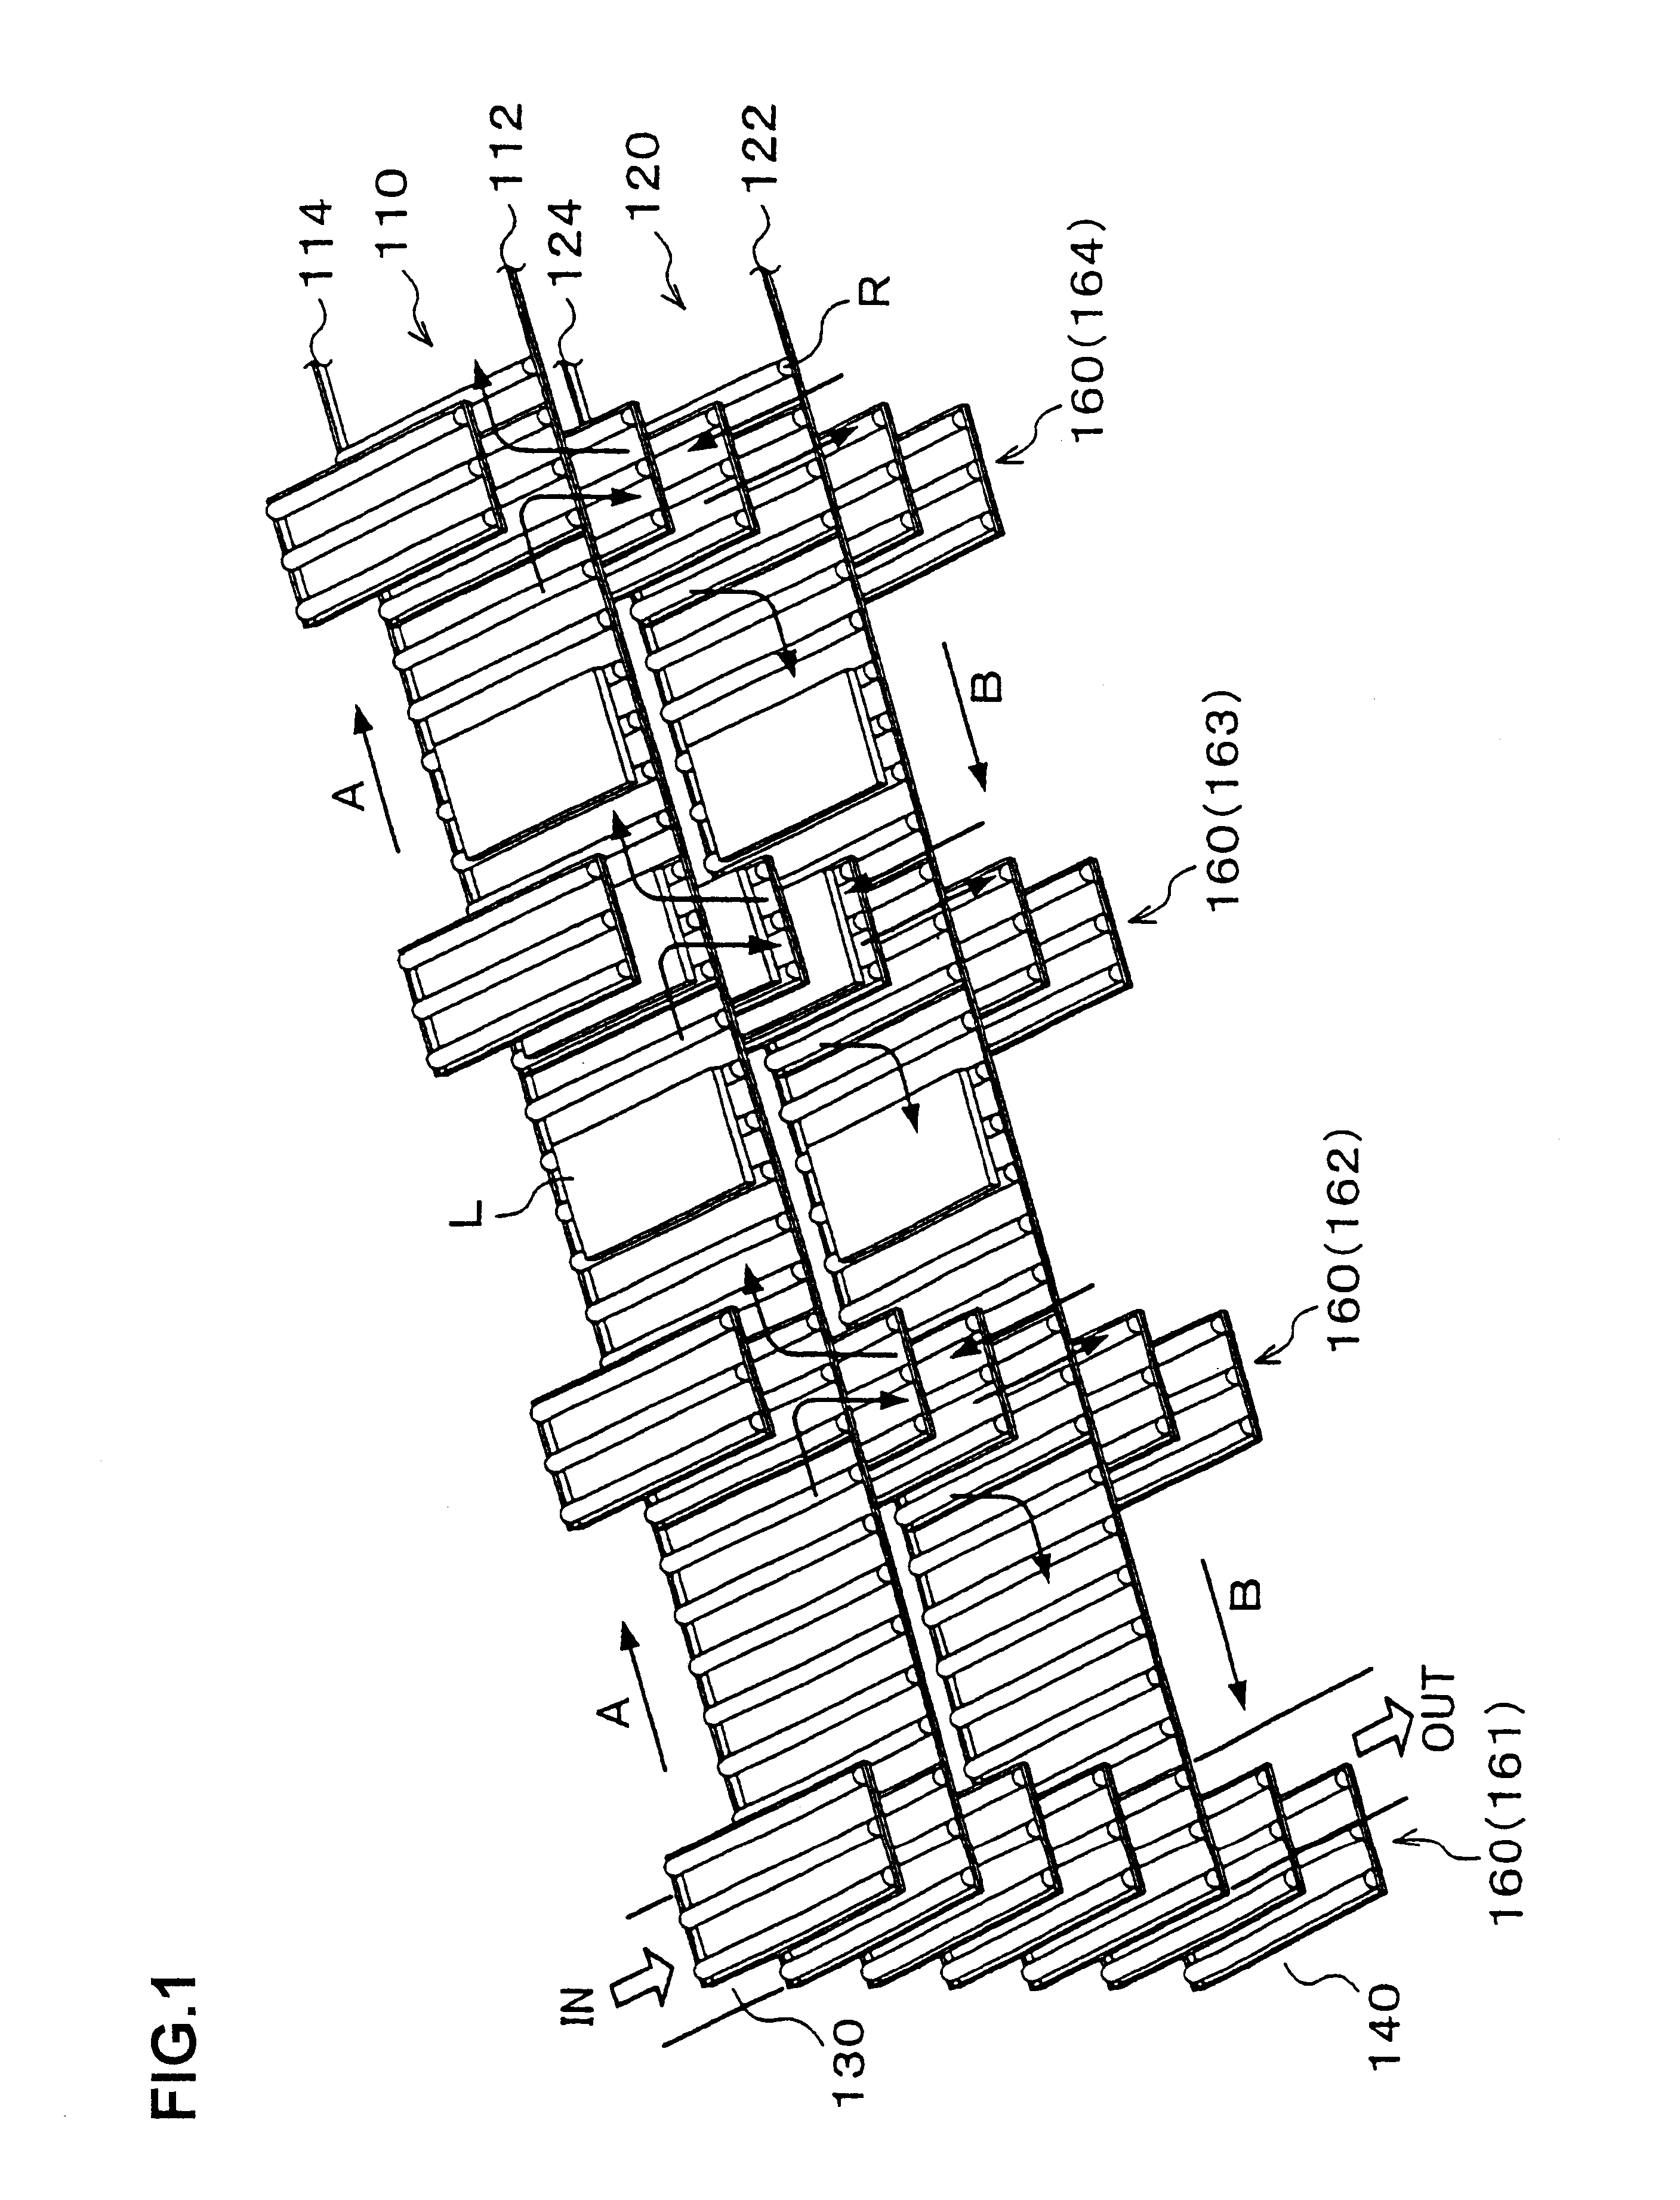 Transfer system for conveying LCD glass substrate